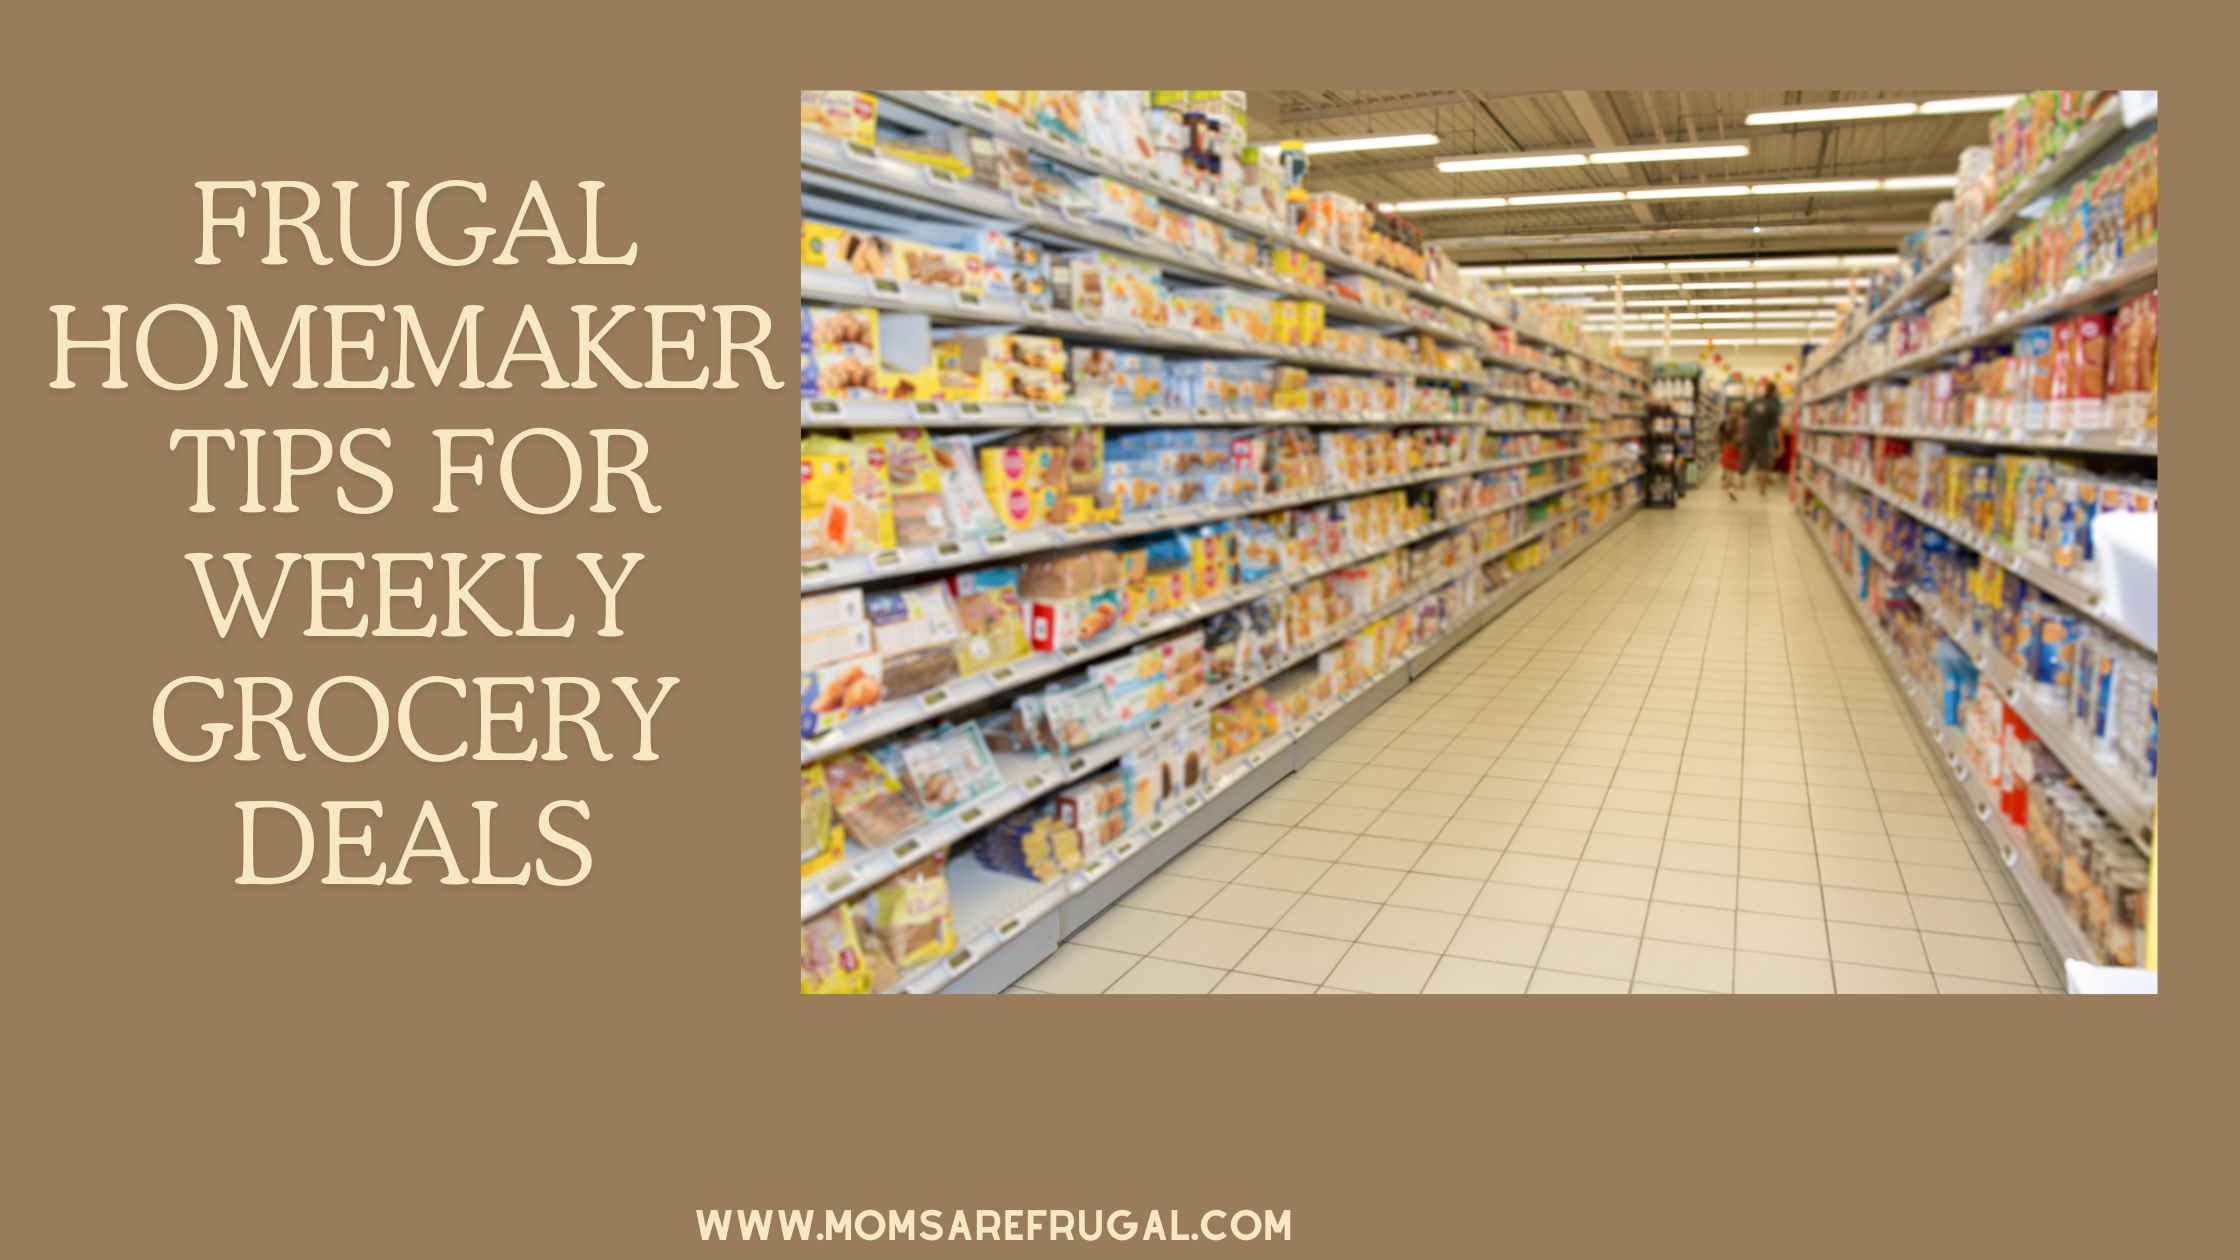 Frugal Homemaker Tips On Weekly Grocery Deals